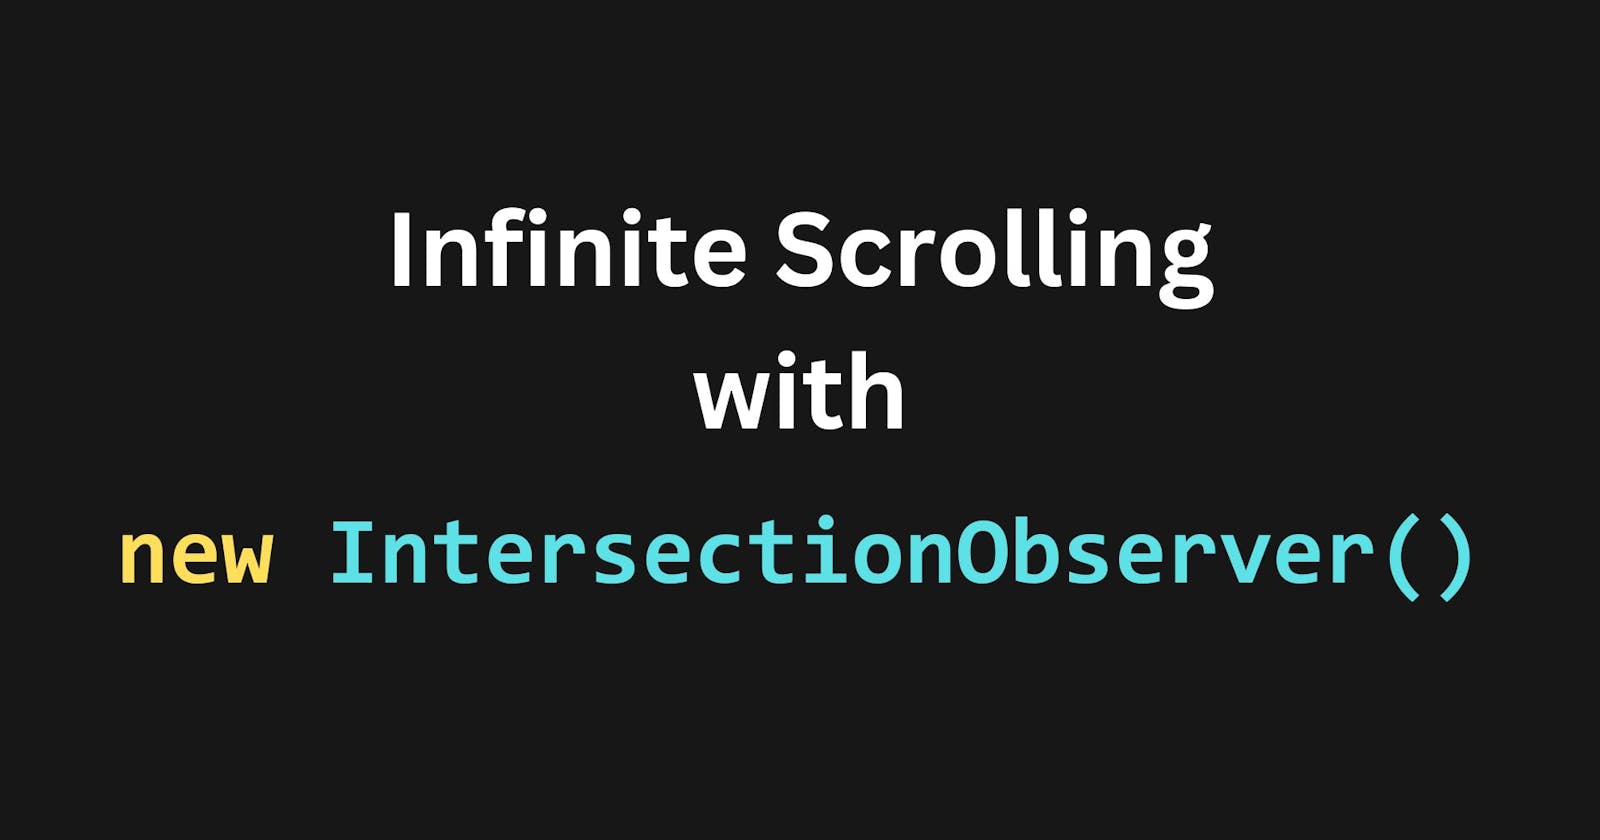 How to implement Infinite Scrolling with IntersectionObserver API